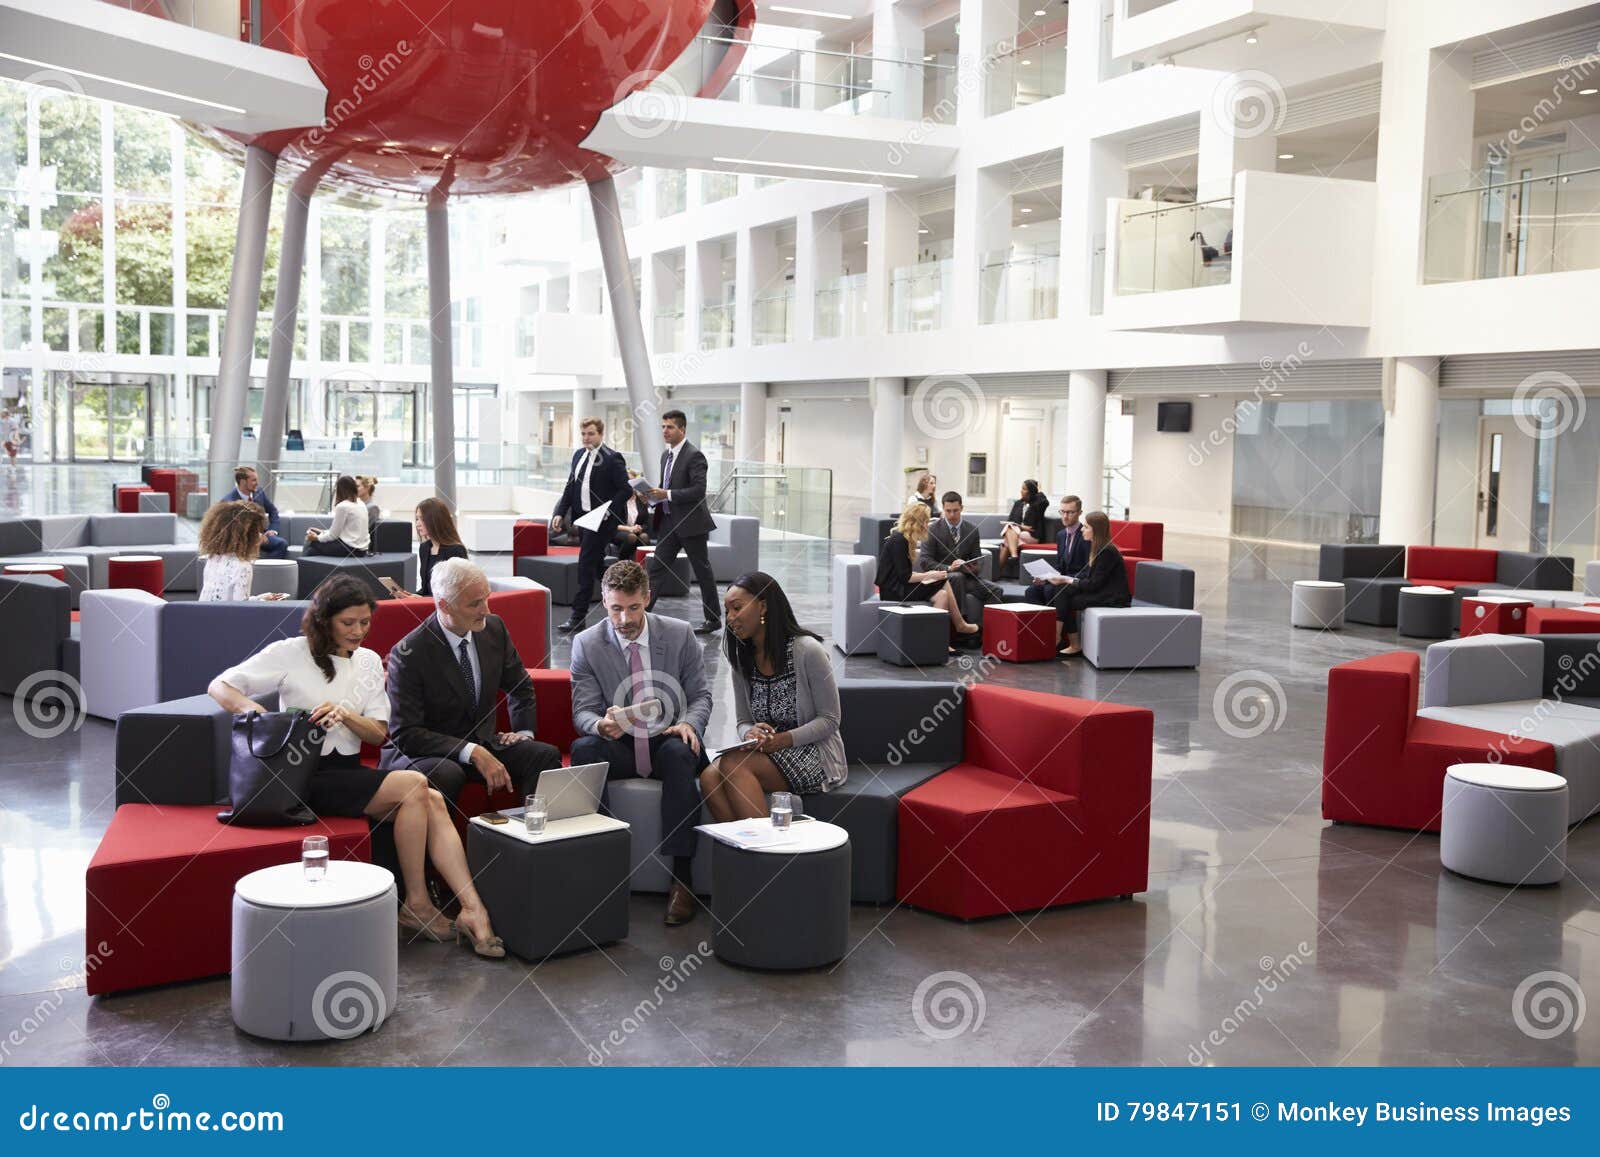 businesspeople meeting in busy lobby of modern office